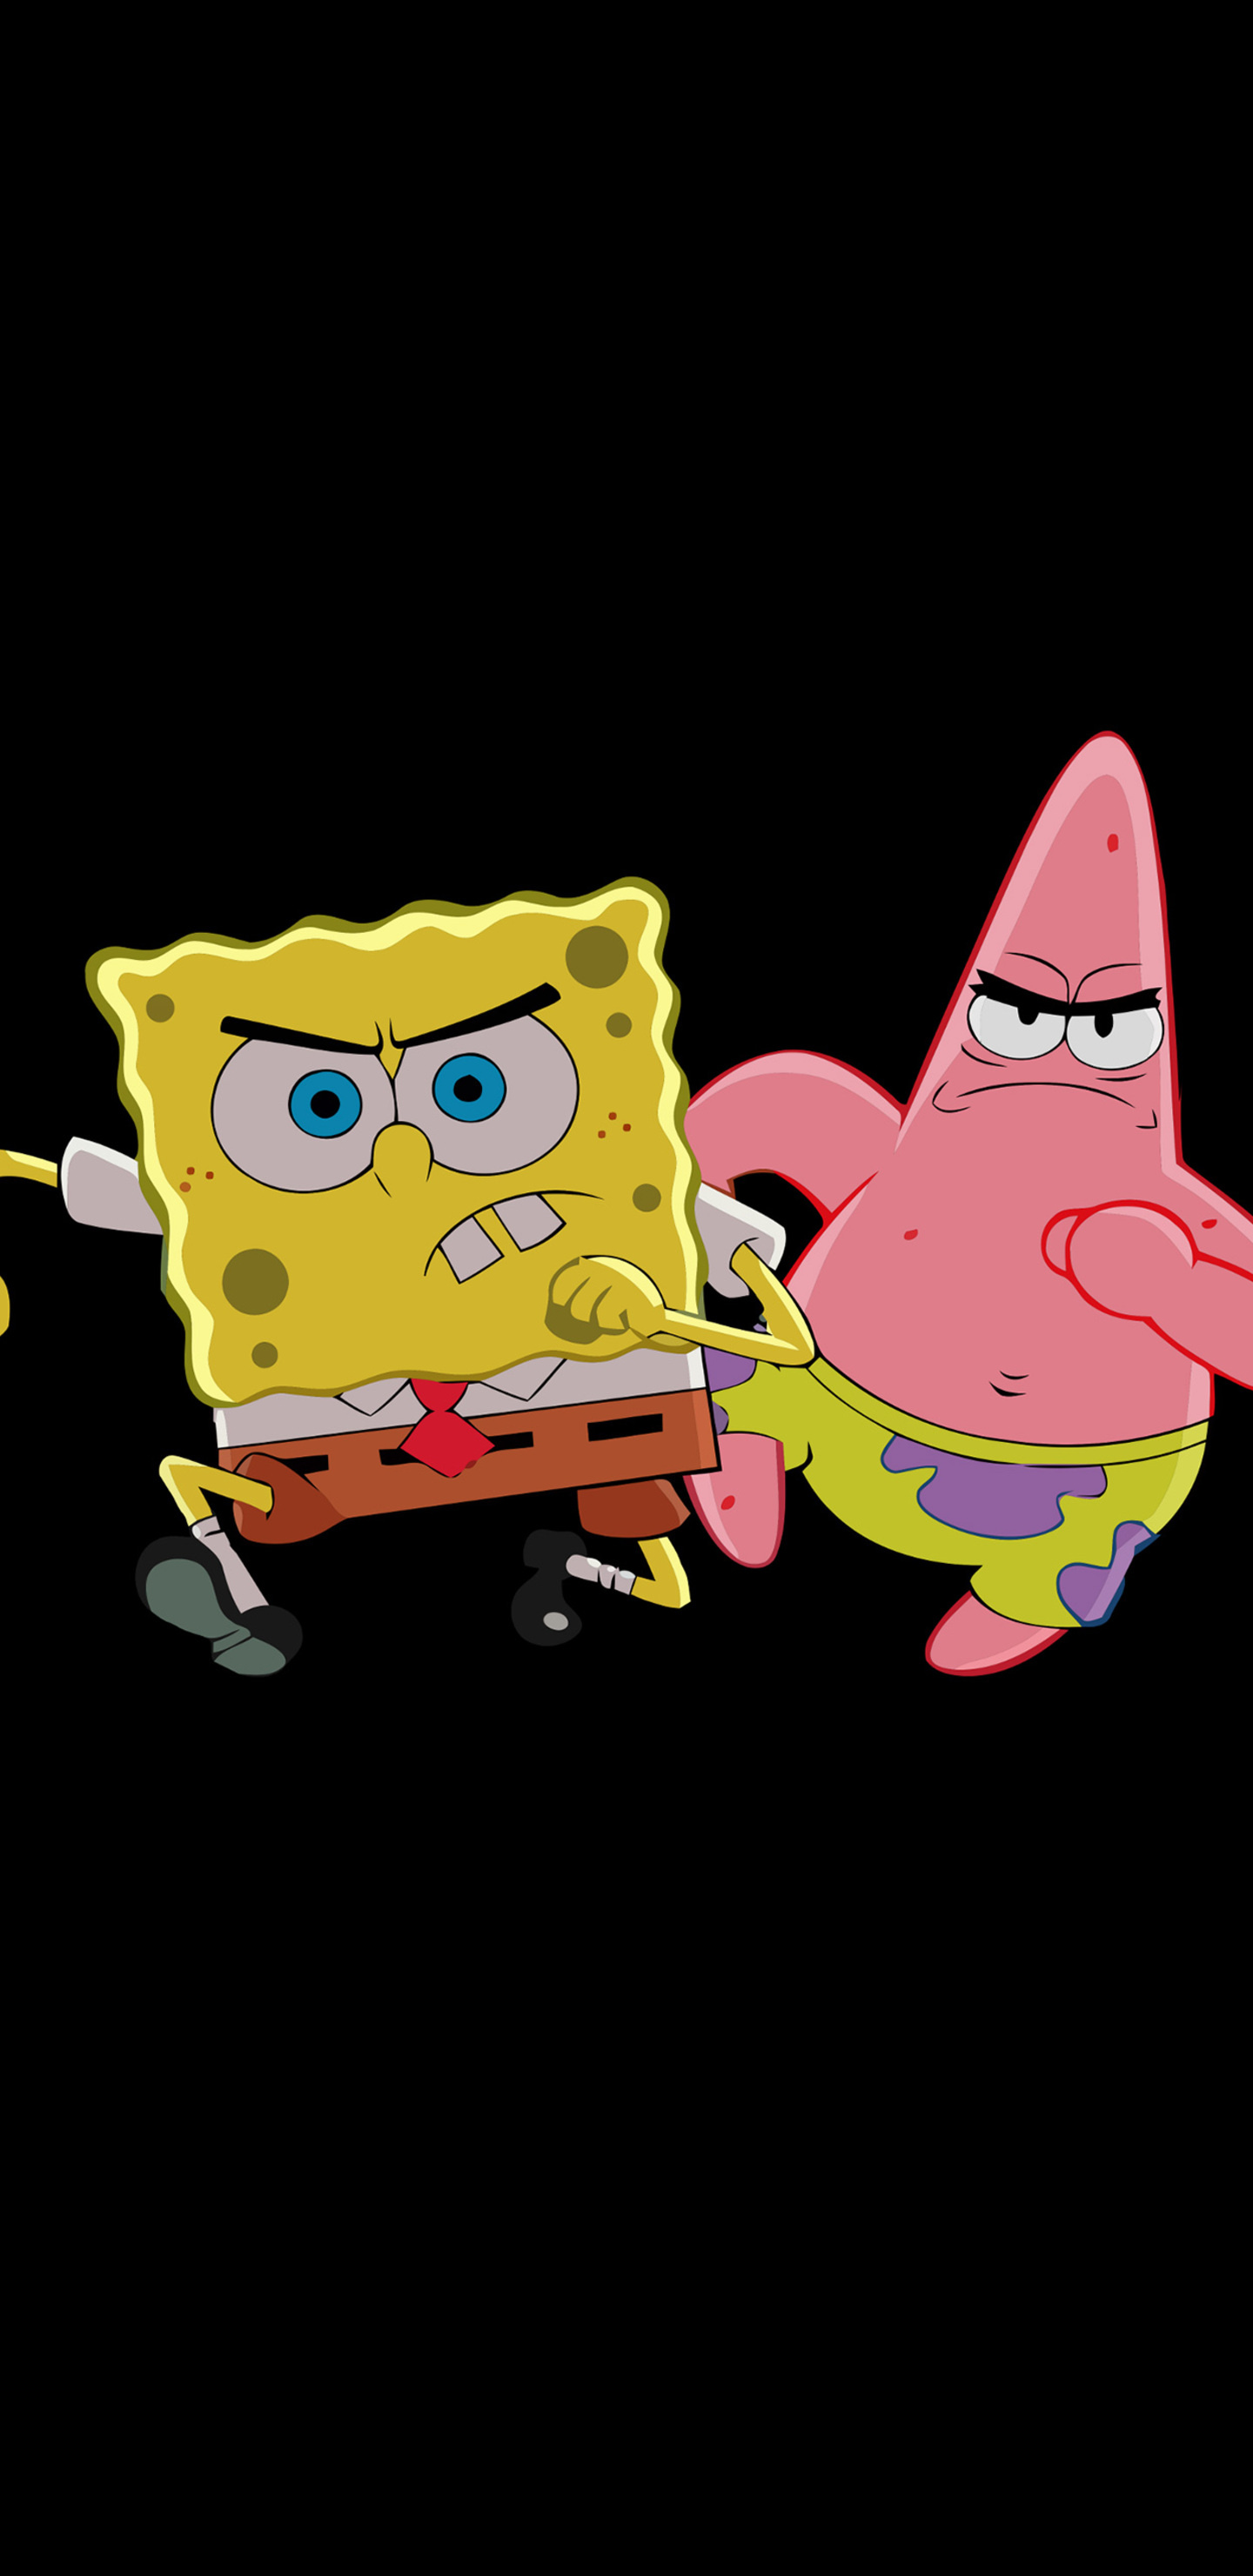 Patrick Star and SpongeBob, Samsung Galaxy wallpapers, High-quality images, 1440x2960 HD Phone